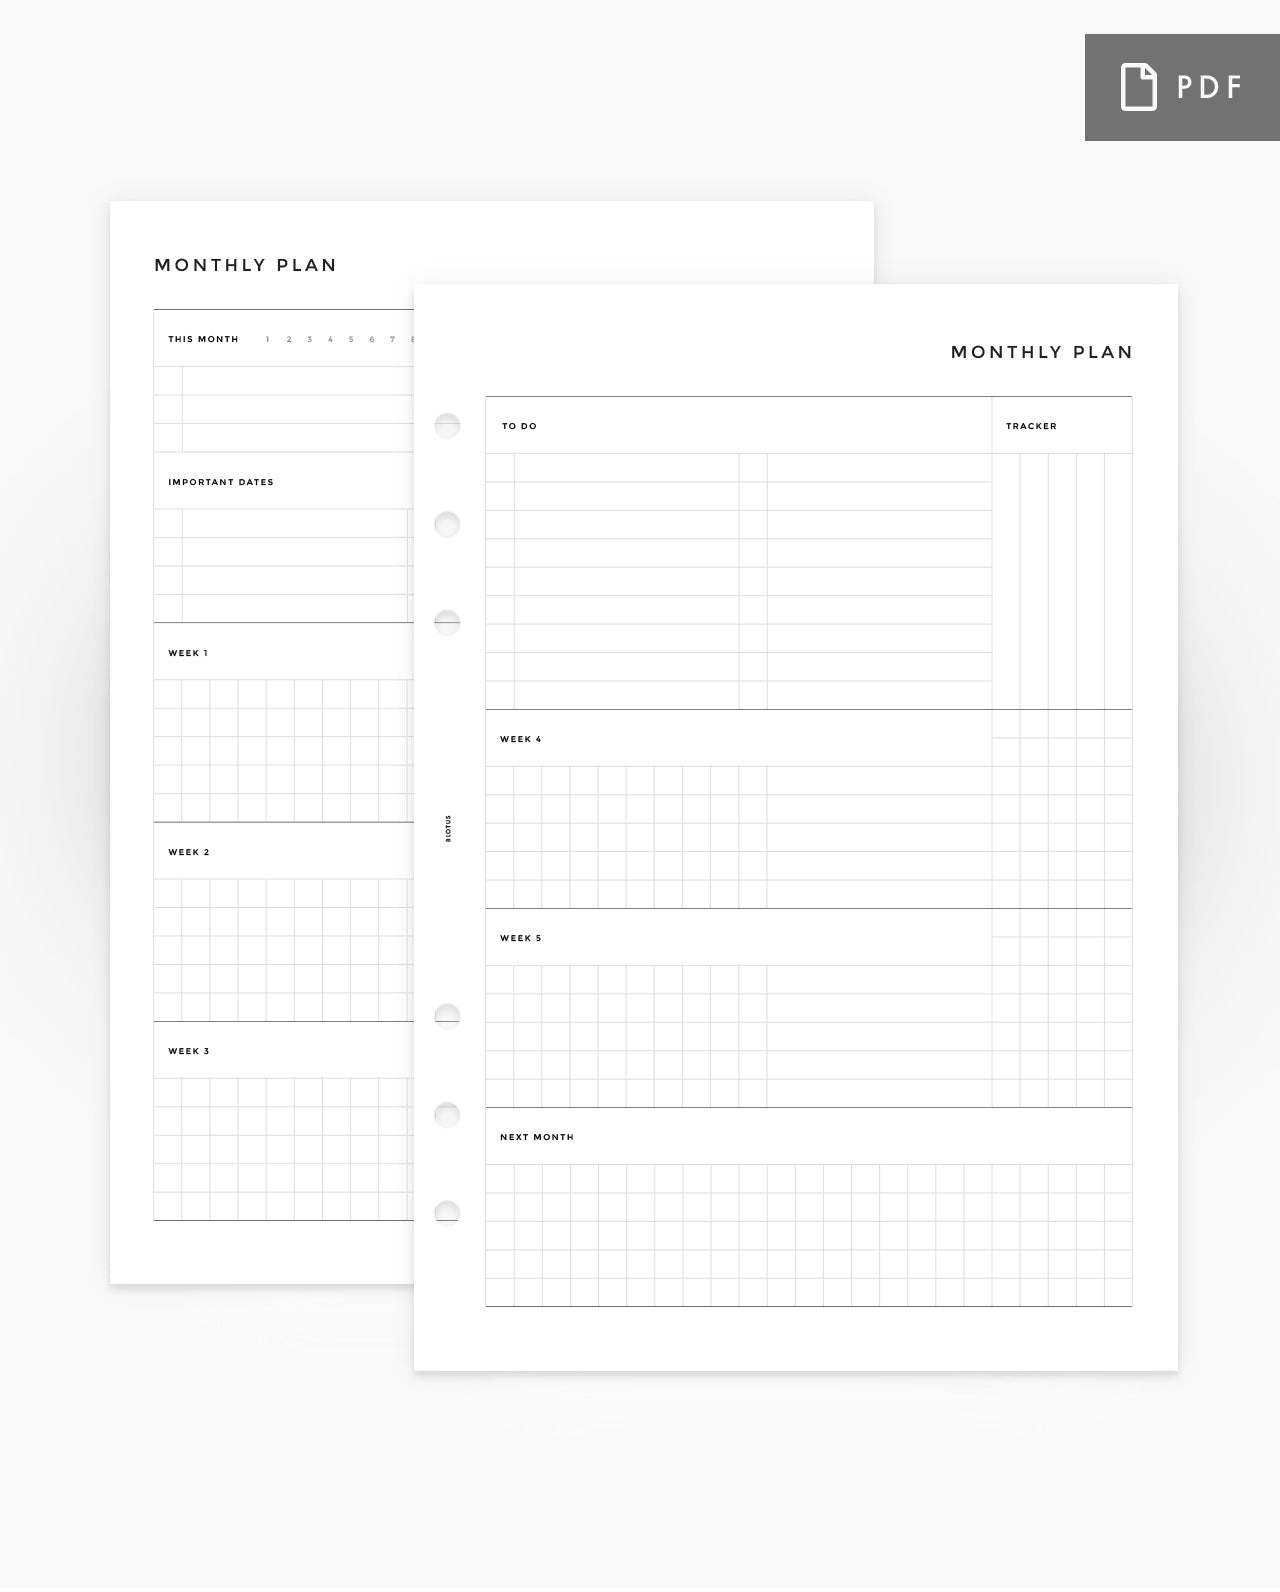 MN175 - Monthly Planner - Daily Tracker - MO2P - PDF